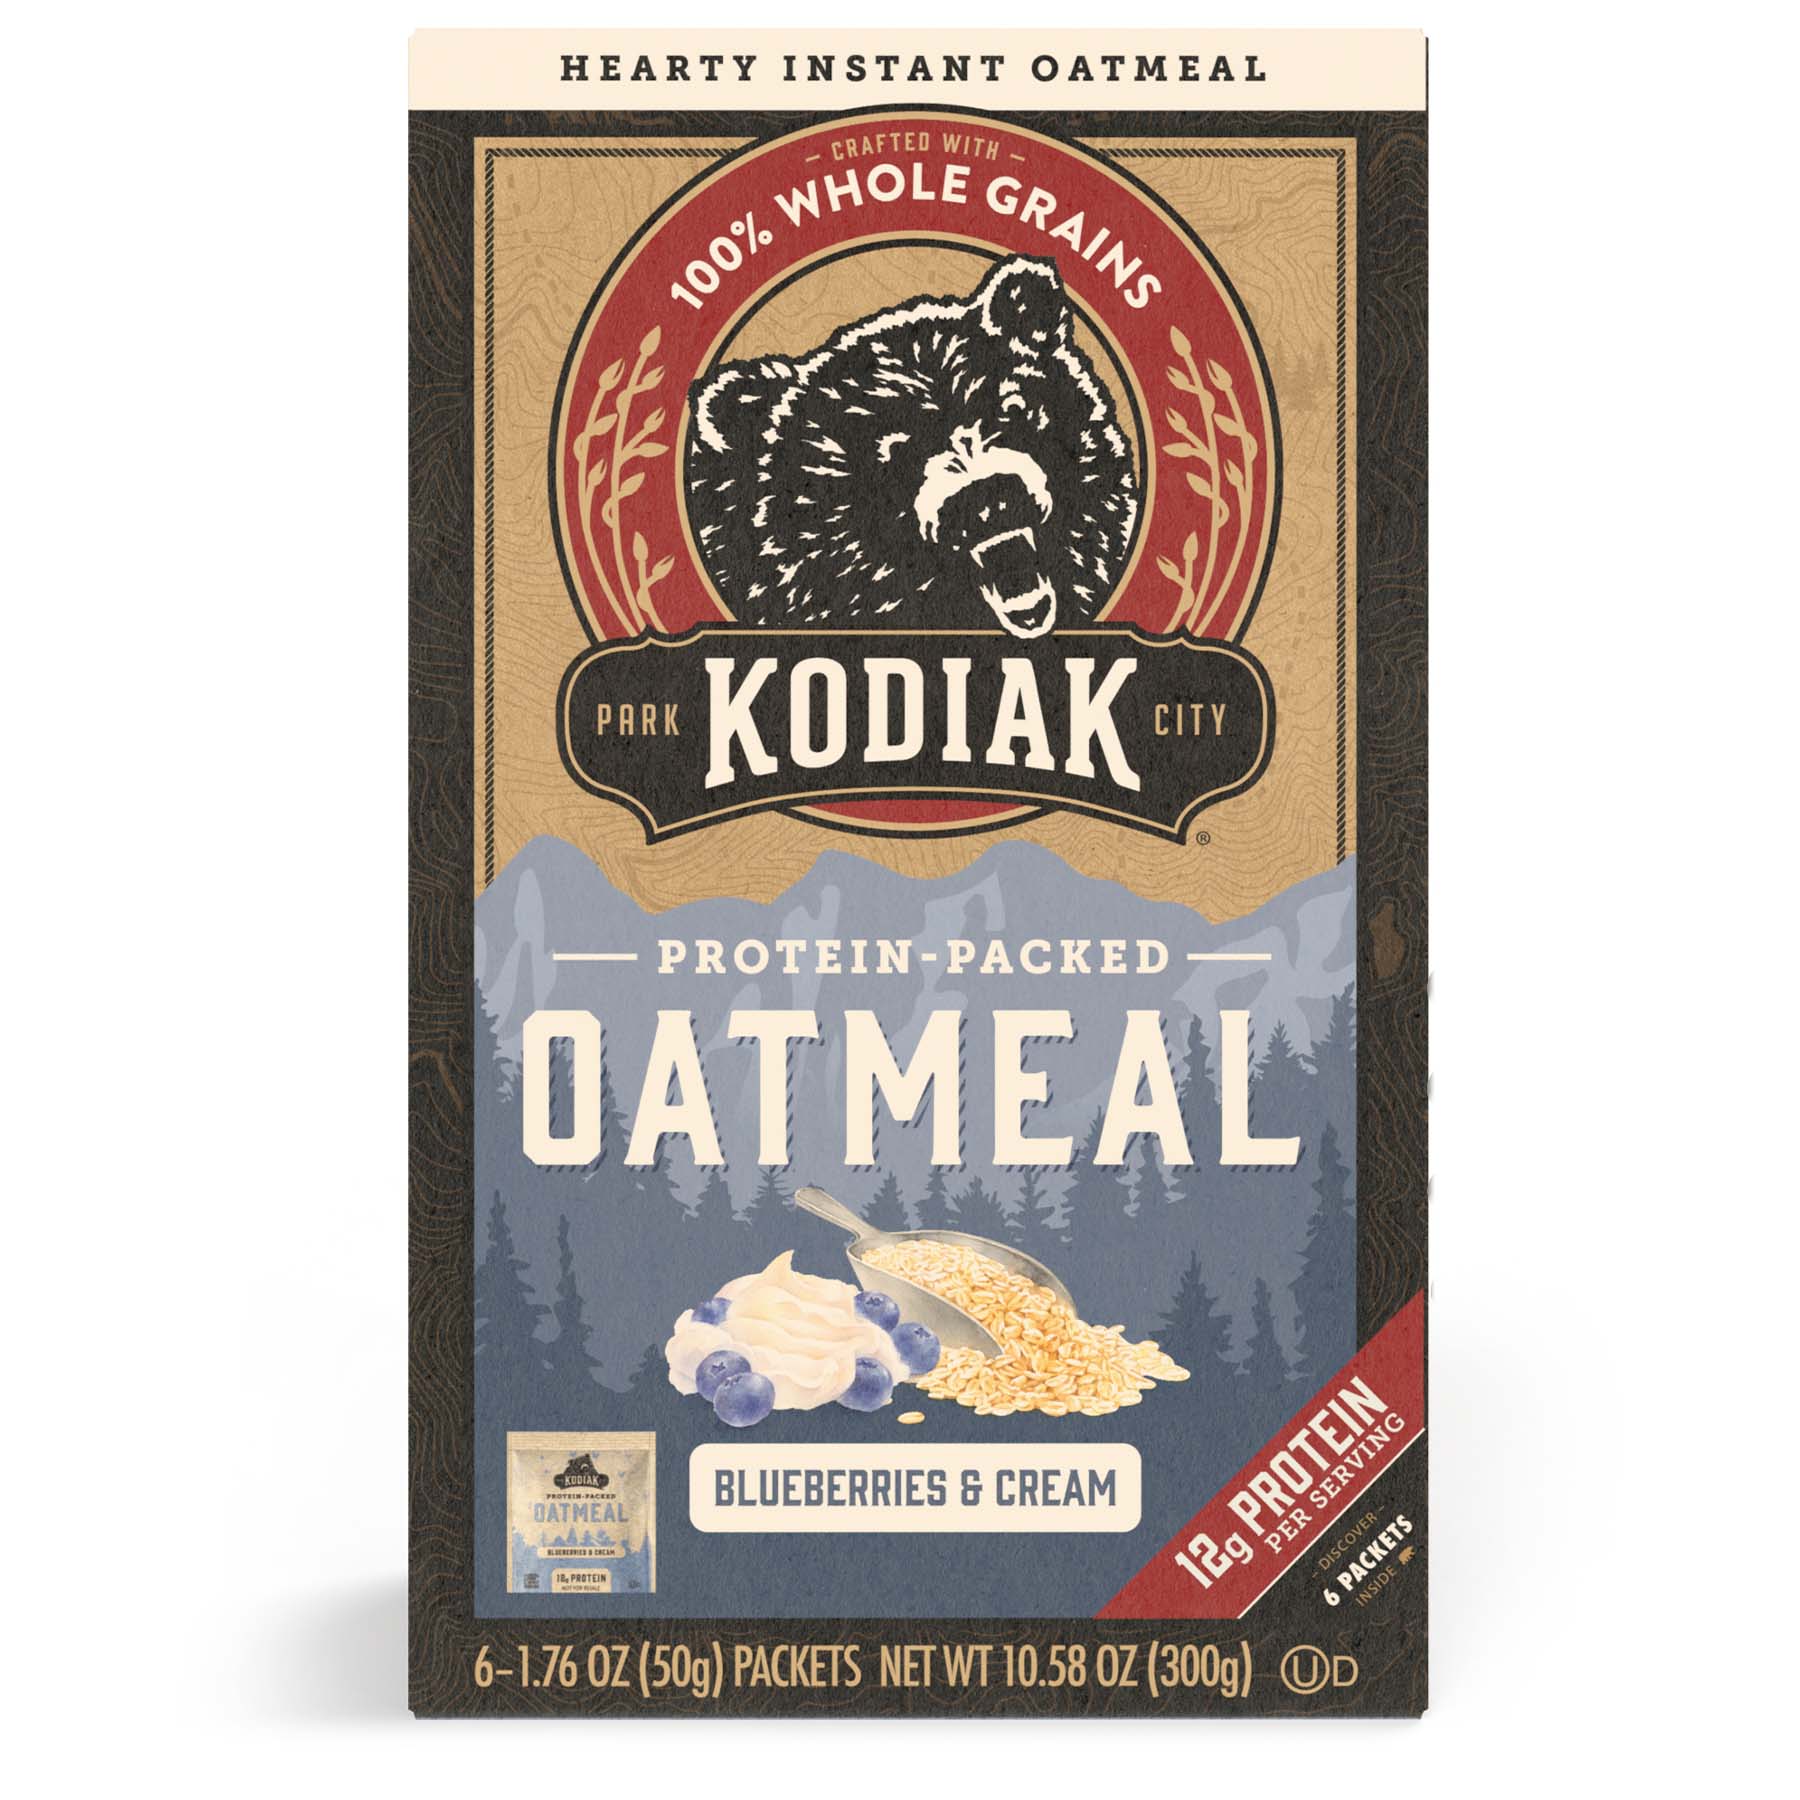 Kodiak Protein-Packed Blueberries and Cream Instant Oatmeal, 1.76 oz, 6 Packets - image 1 of 8